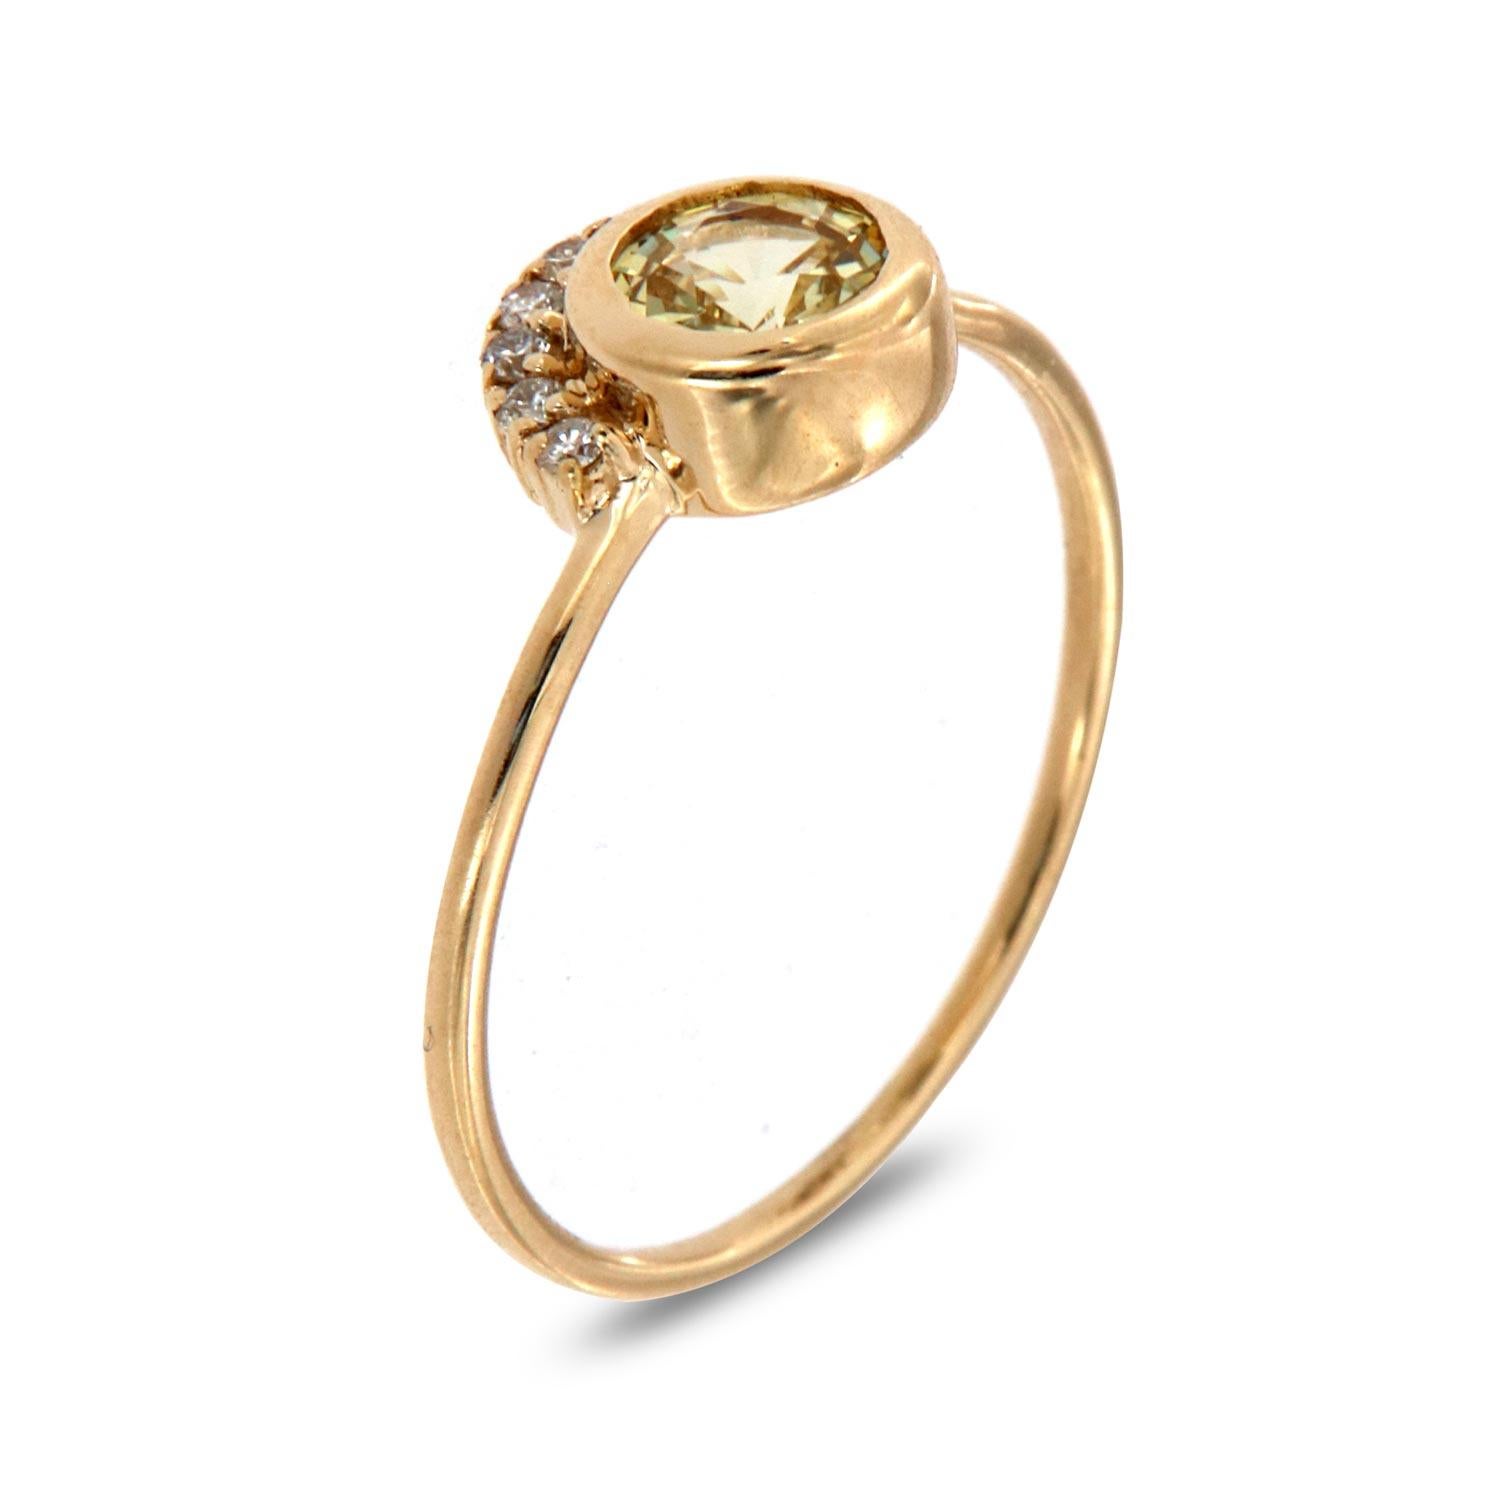 This petite fashion ring is impressive in its vintage appeal, featuring a bezeled natural yellow round brilliant sapphire, accented with round brilliant diamonds. Experience the difference in person!

Product details: 

Center Gemstone Type: